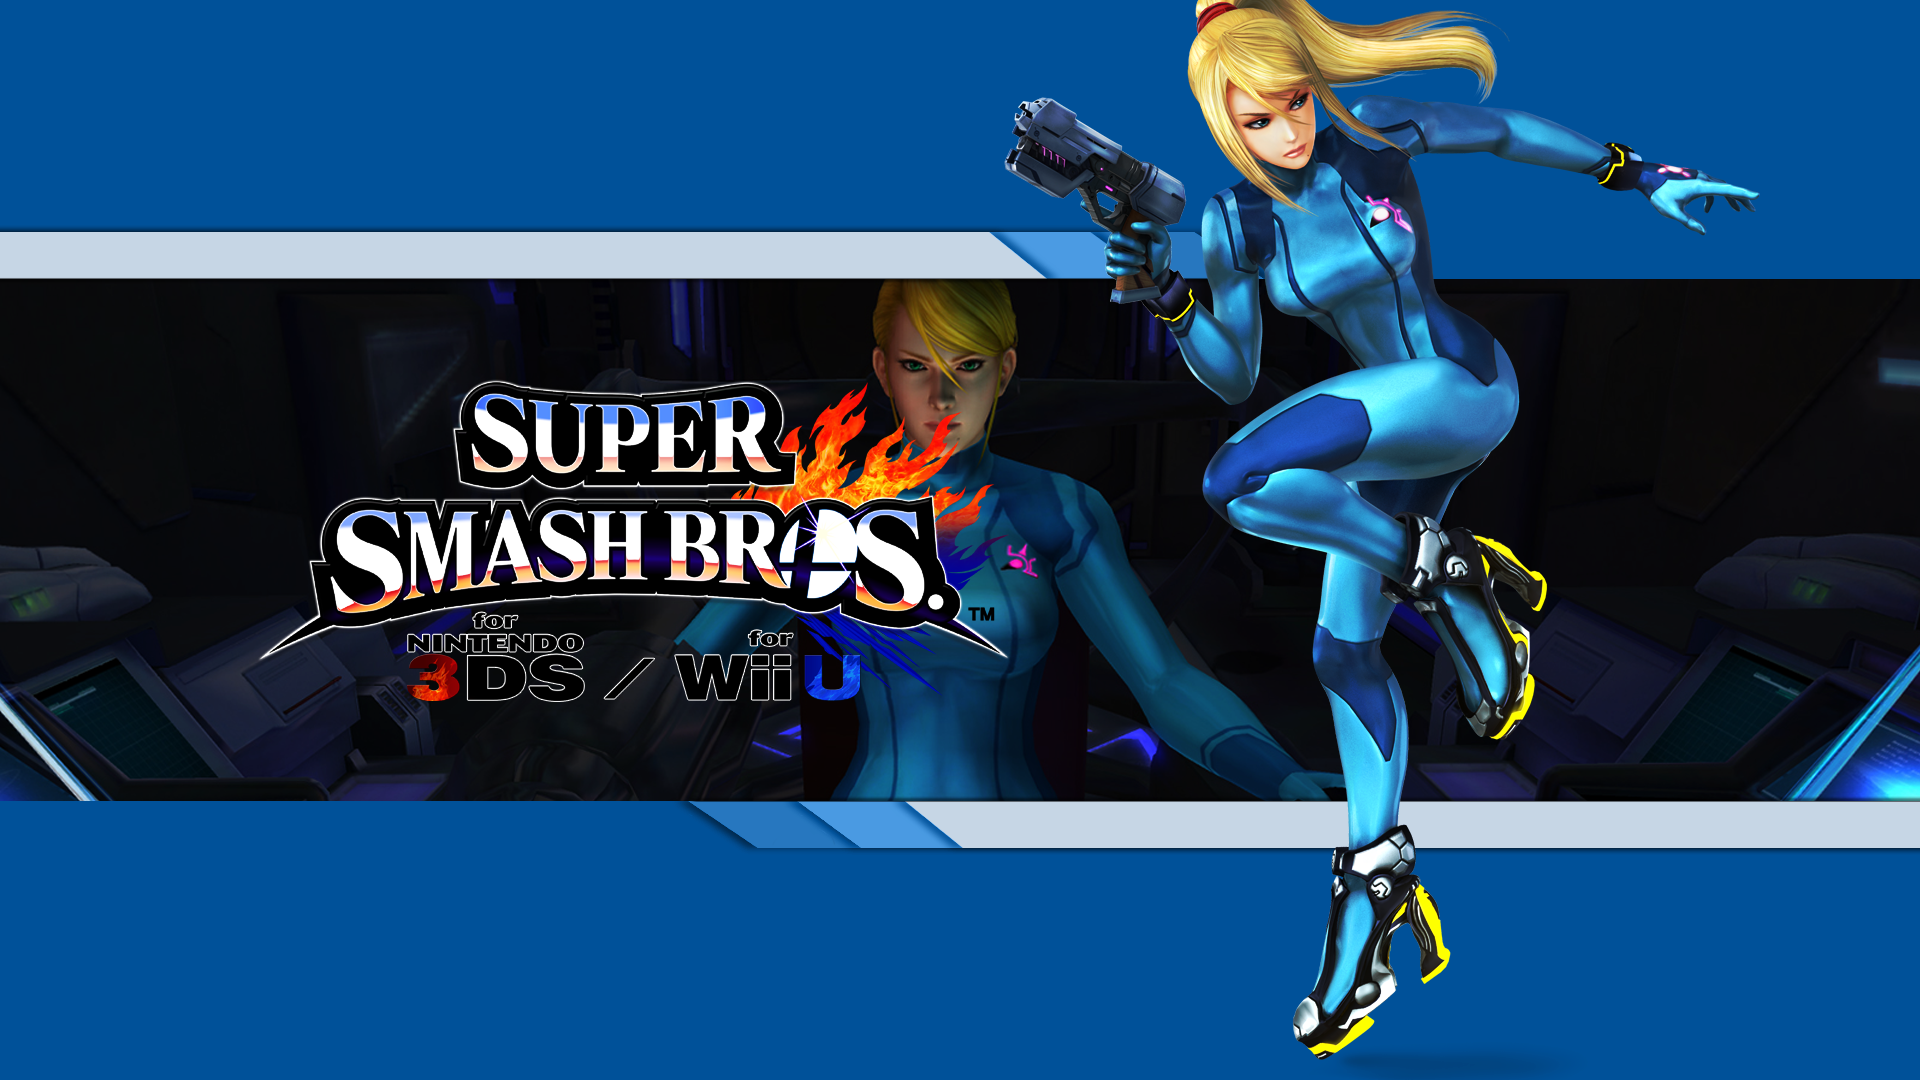 Video Game Super Smash Bros For Nintendo 3DS And Wii U 1920x1080